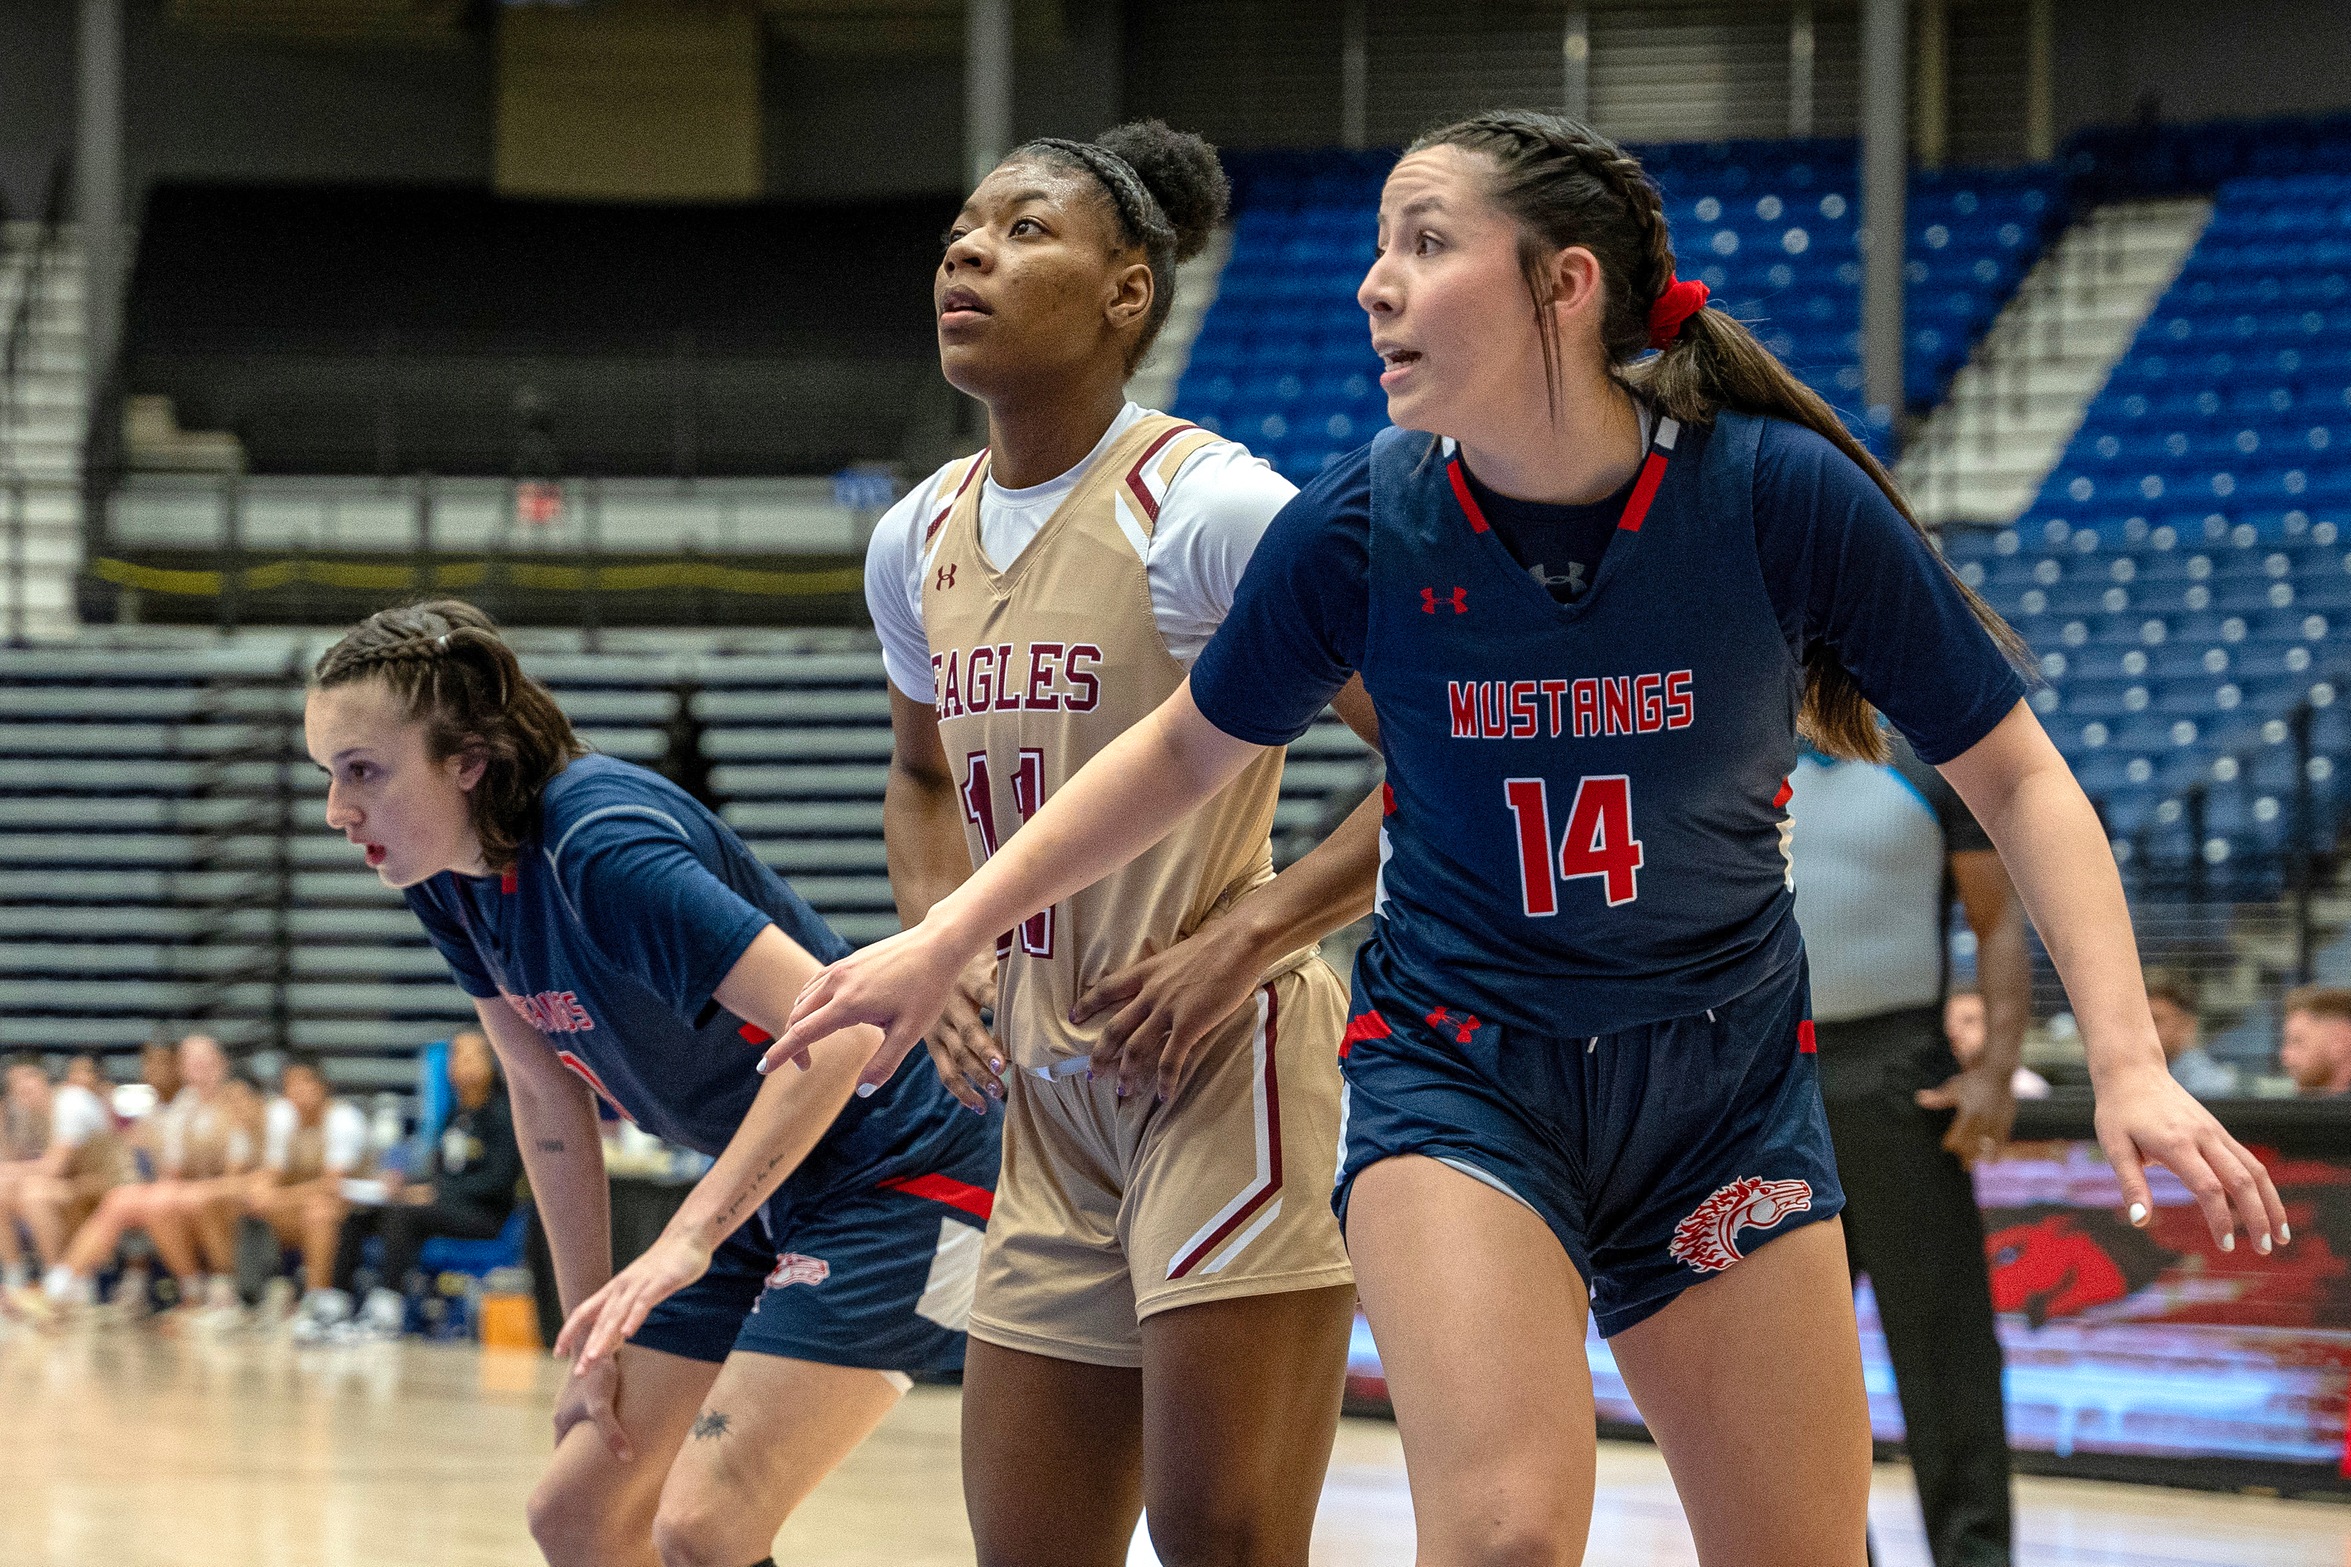 Eagles' cold shooting leads to quarterfinal exit in RRAC Championships